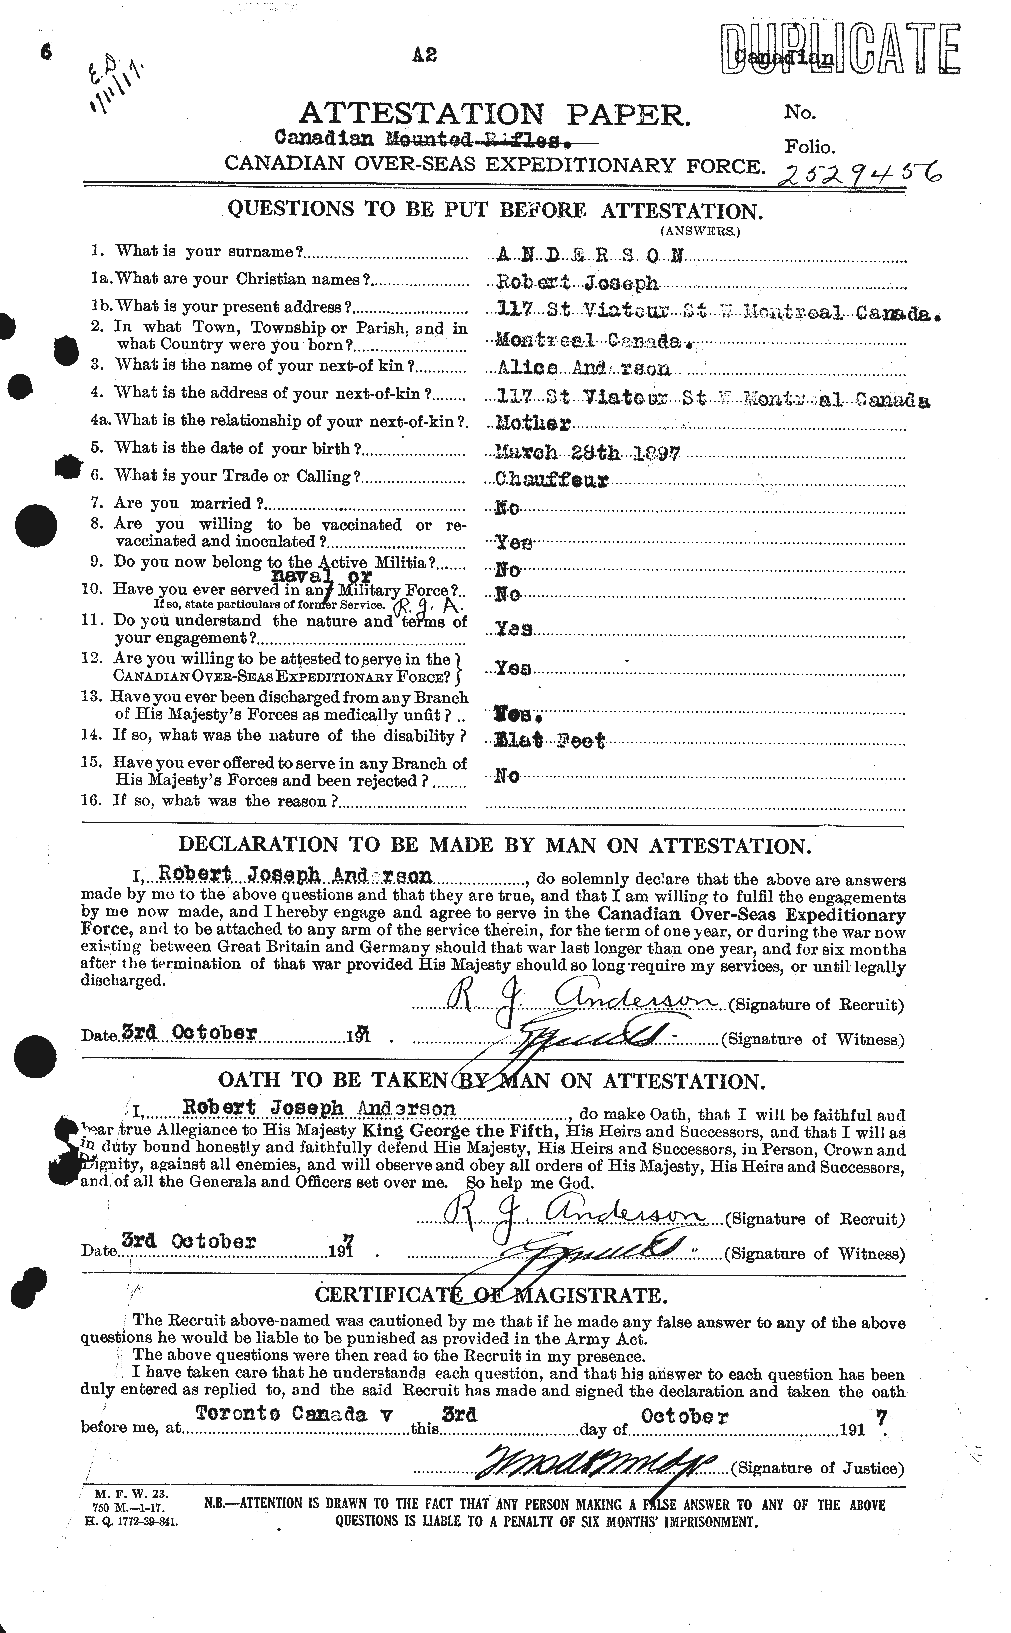 Personnel Records of the First World War - CEF 207238a